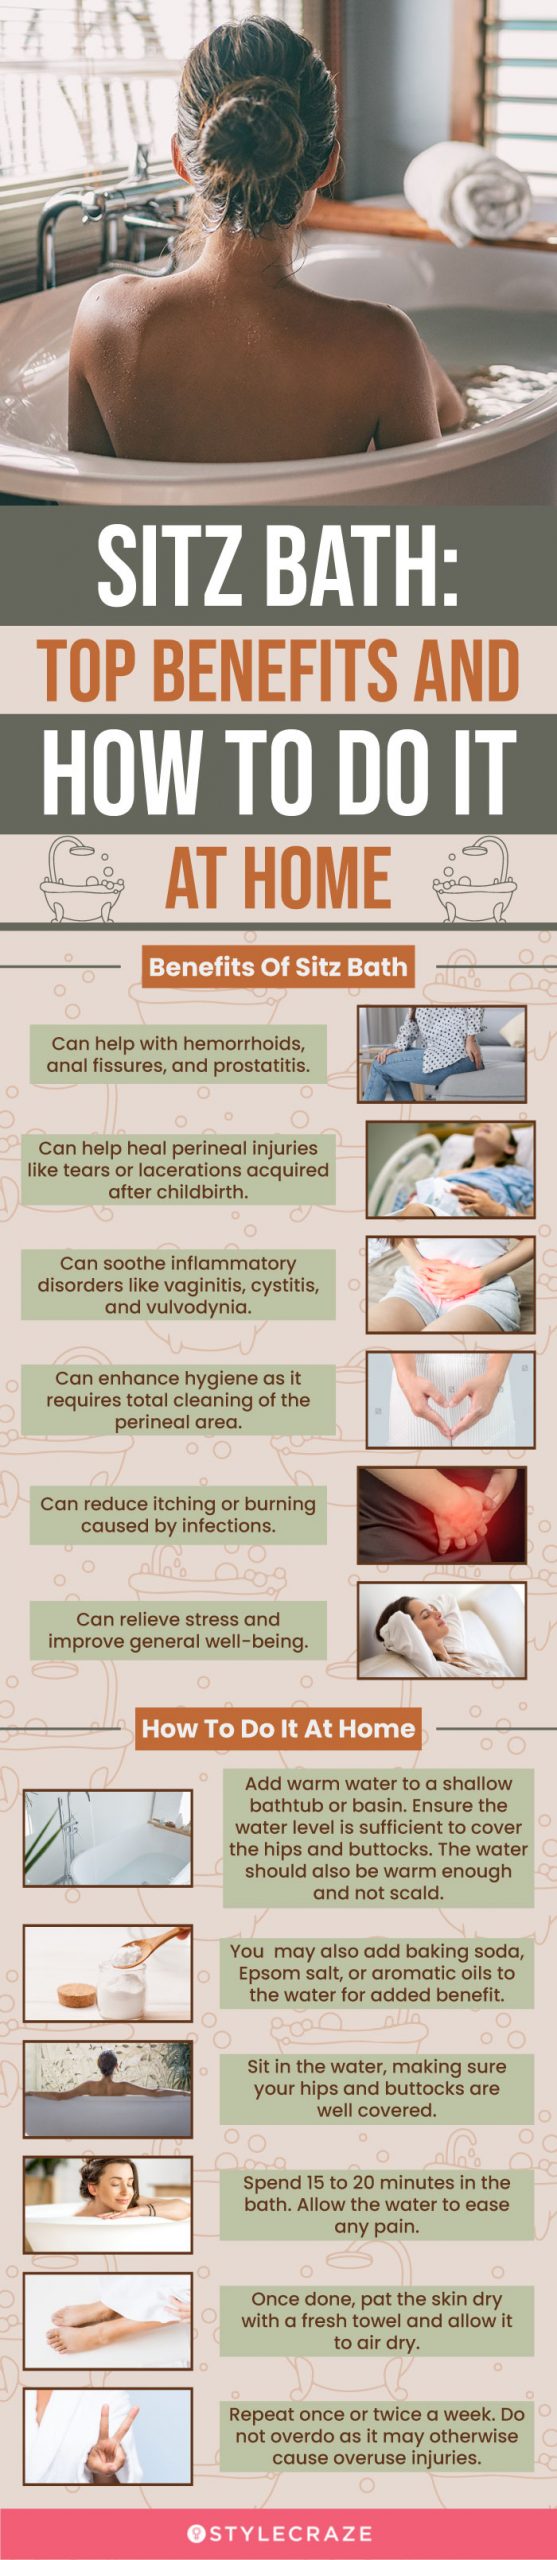 sitz bath top benefits and how to do it at home (infographic)